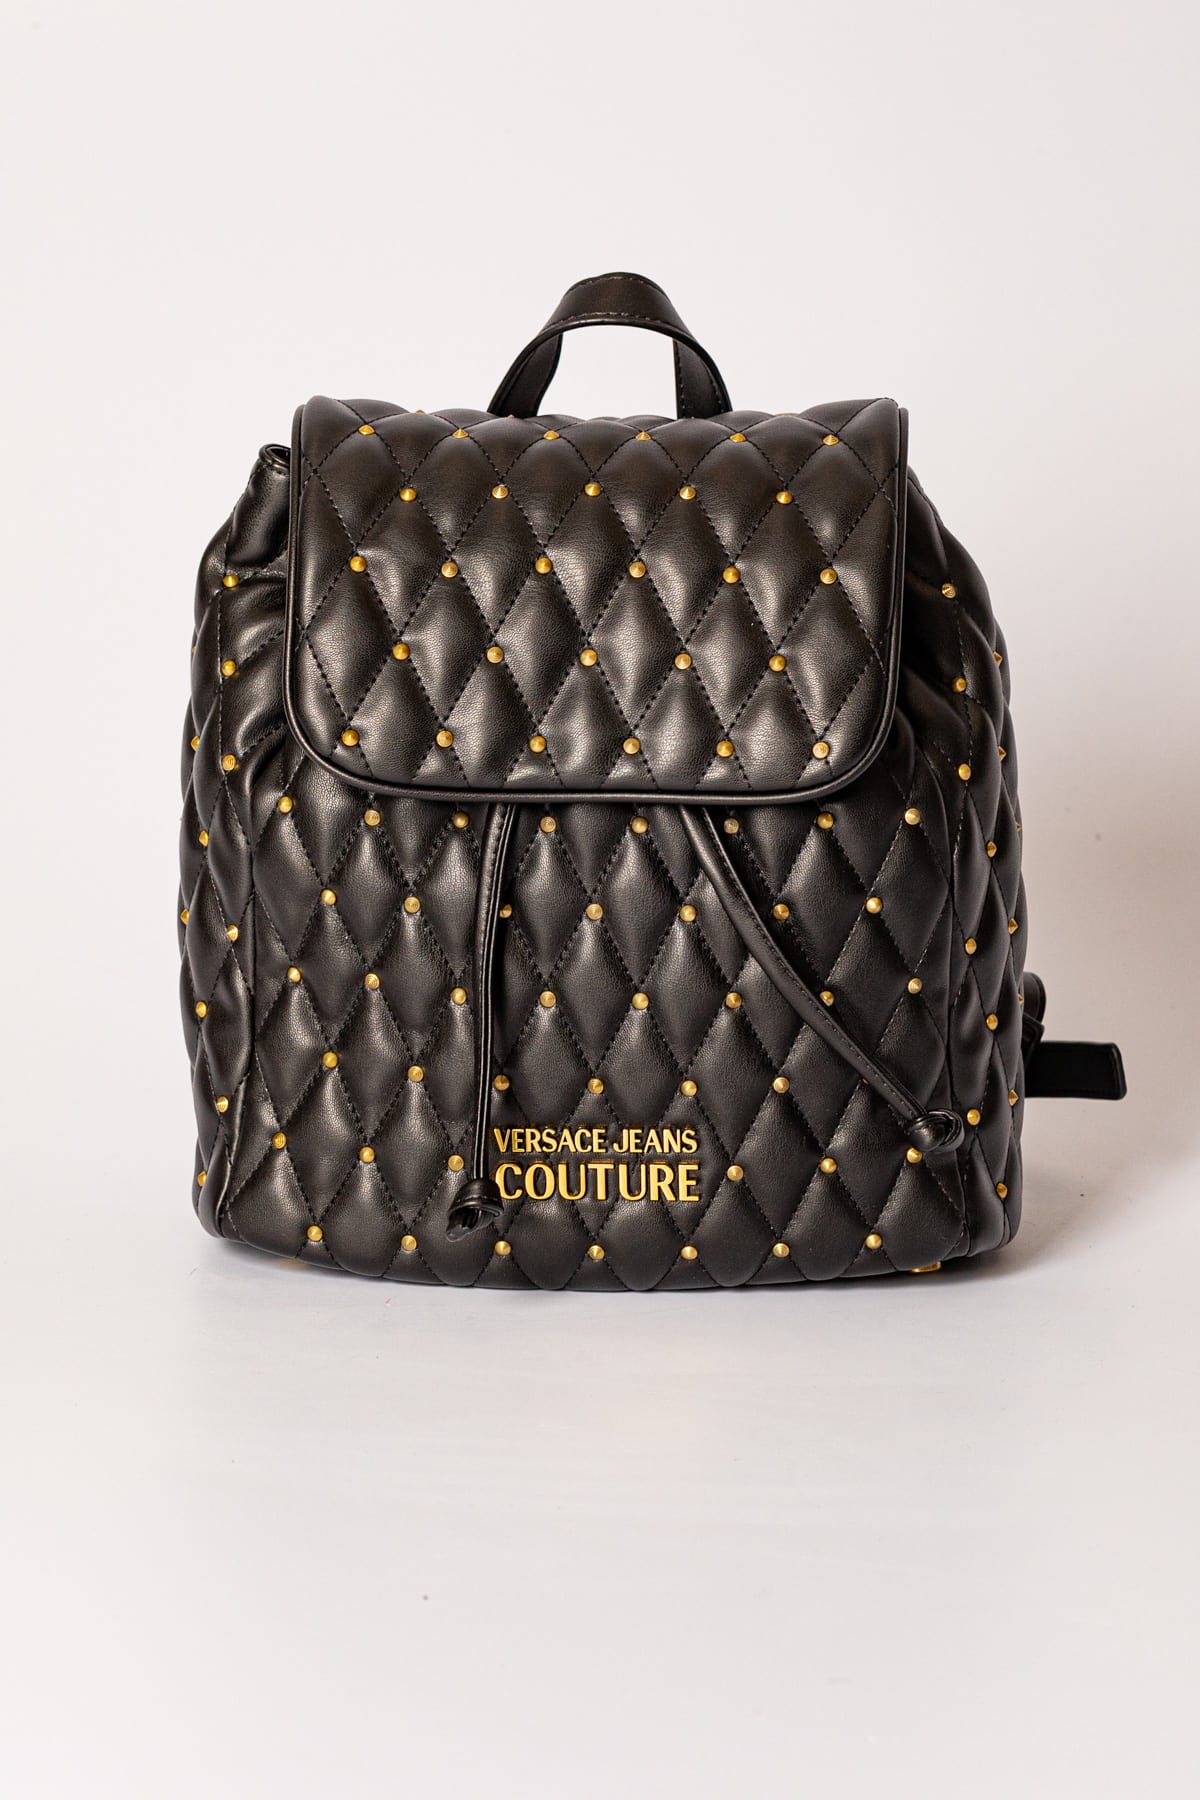 Versace Jeans Couture Backpack In Nero